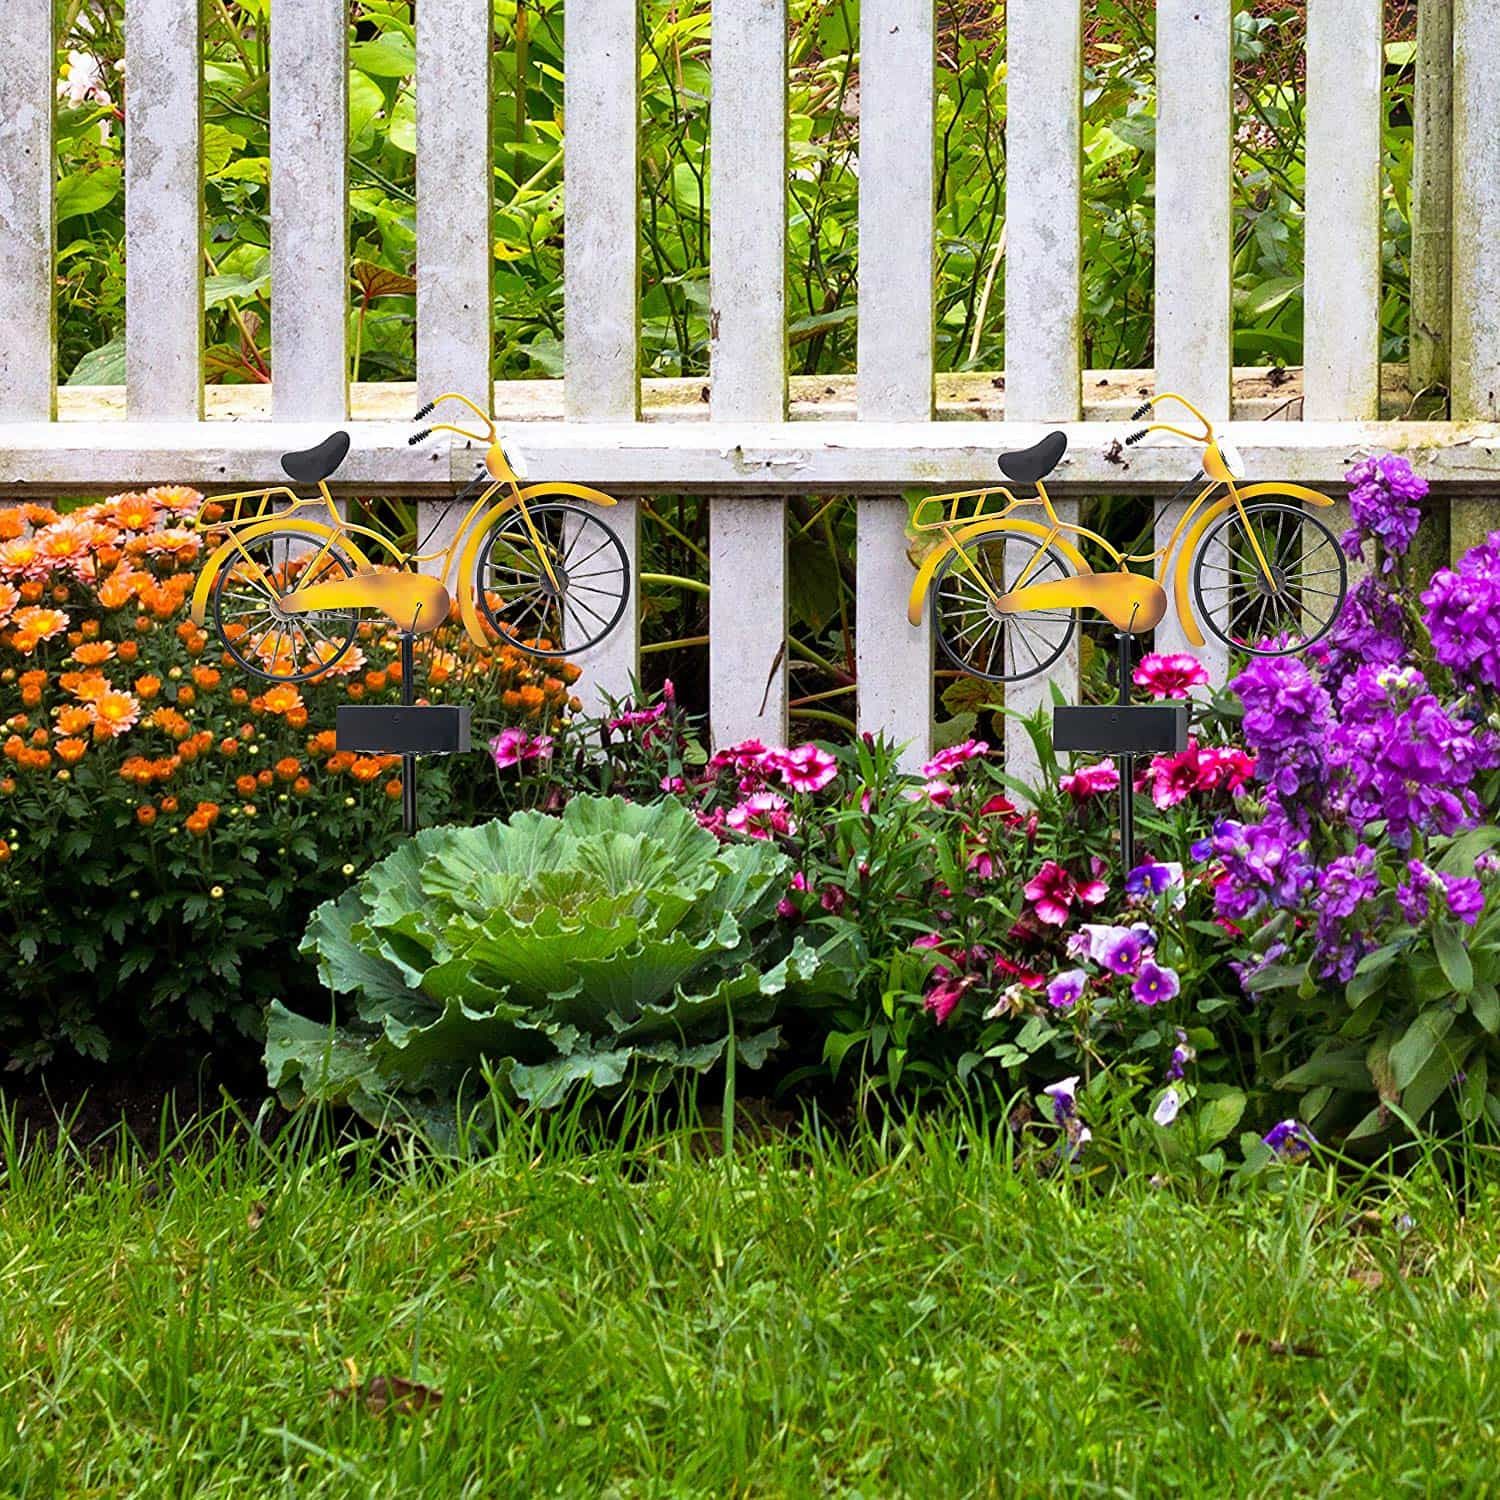 Two little yellow bikes on orange and purple flowers beside the fence